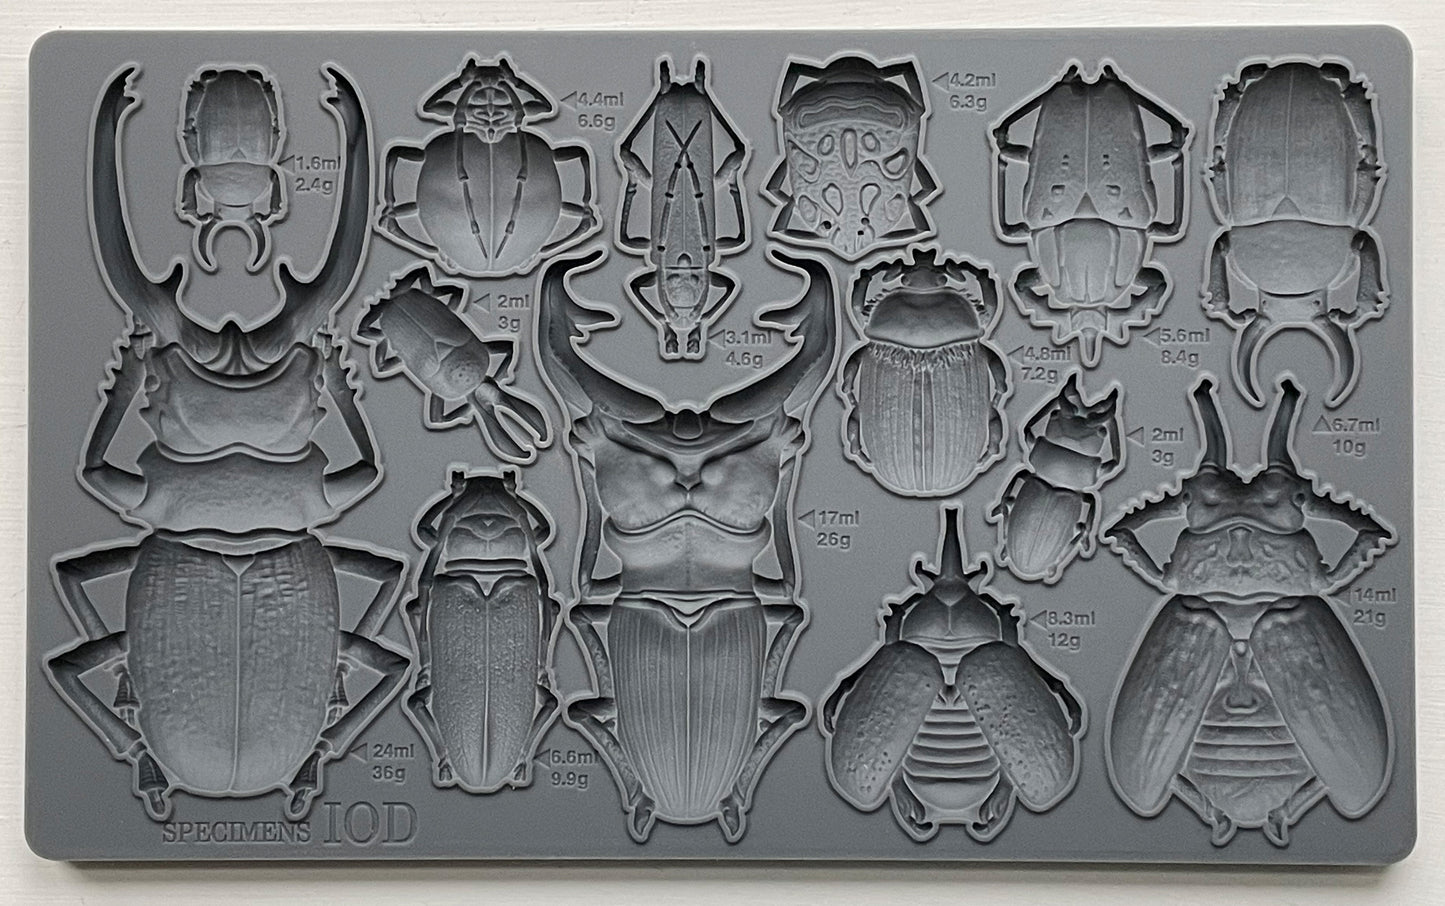 Specimens 6x10" Decor Mould by Iron Orchid Designs (IOD)